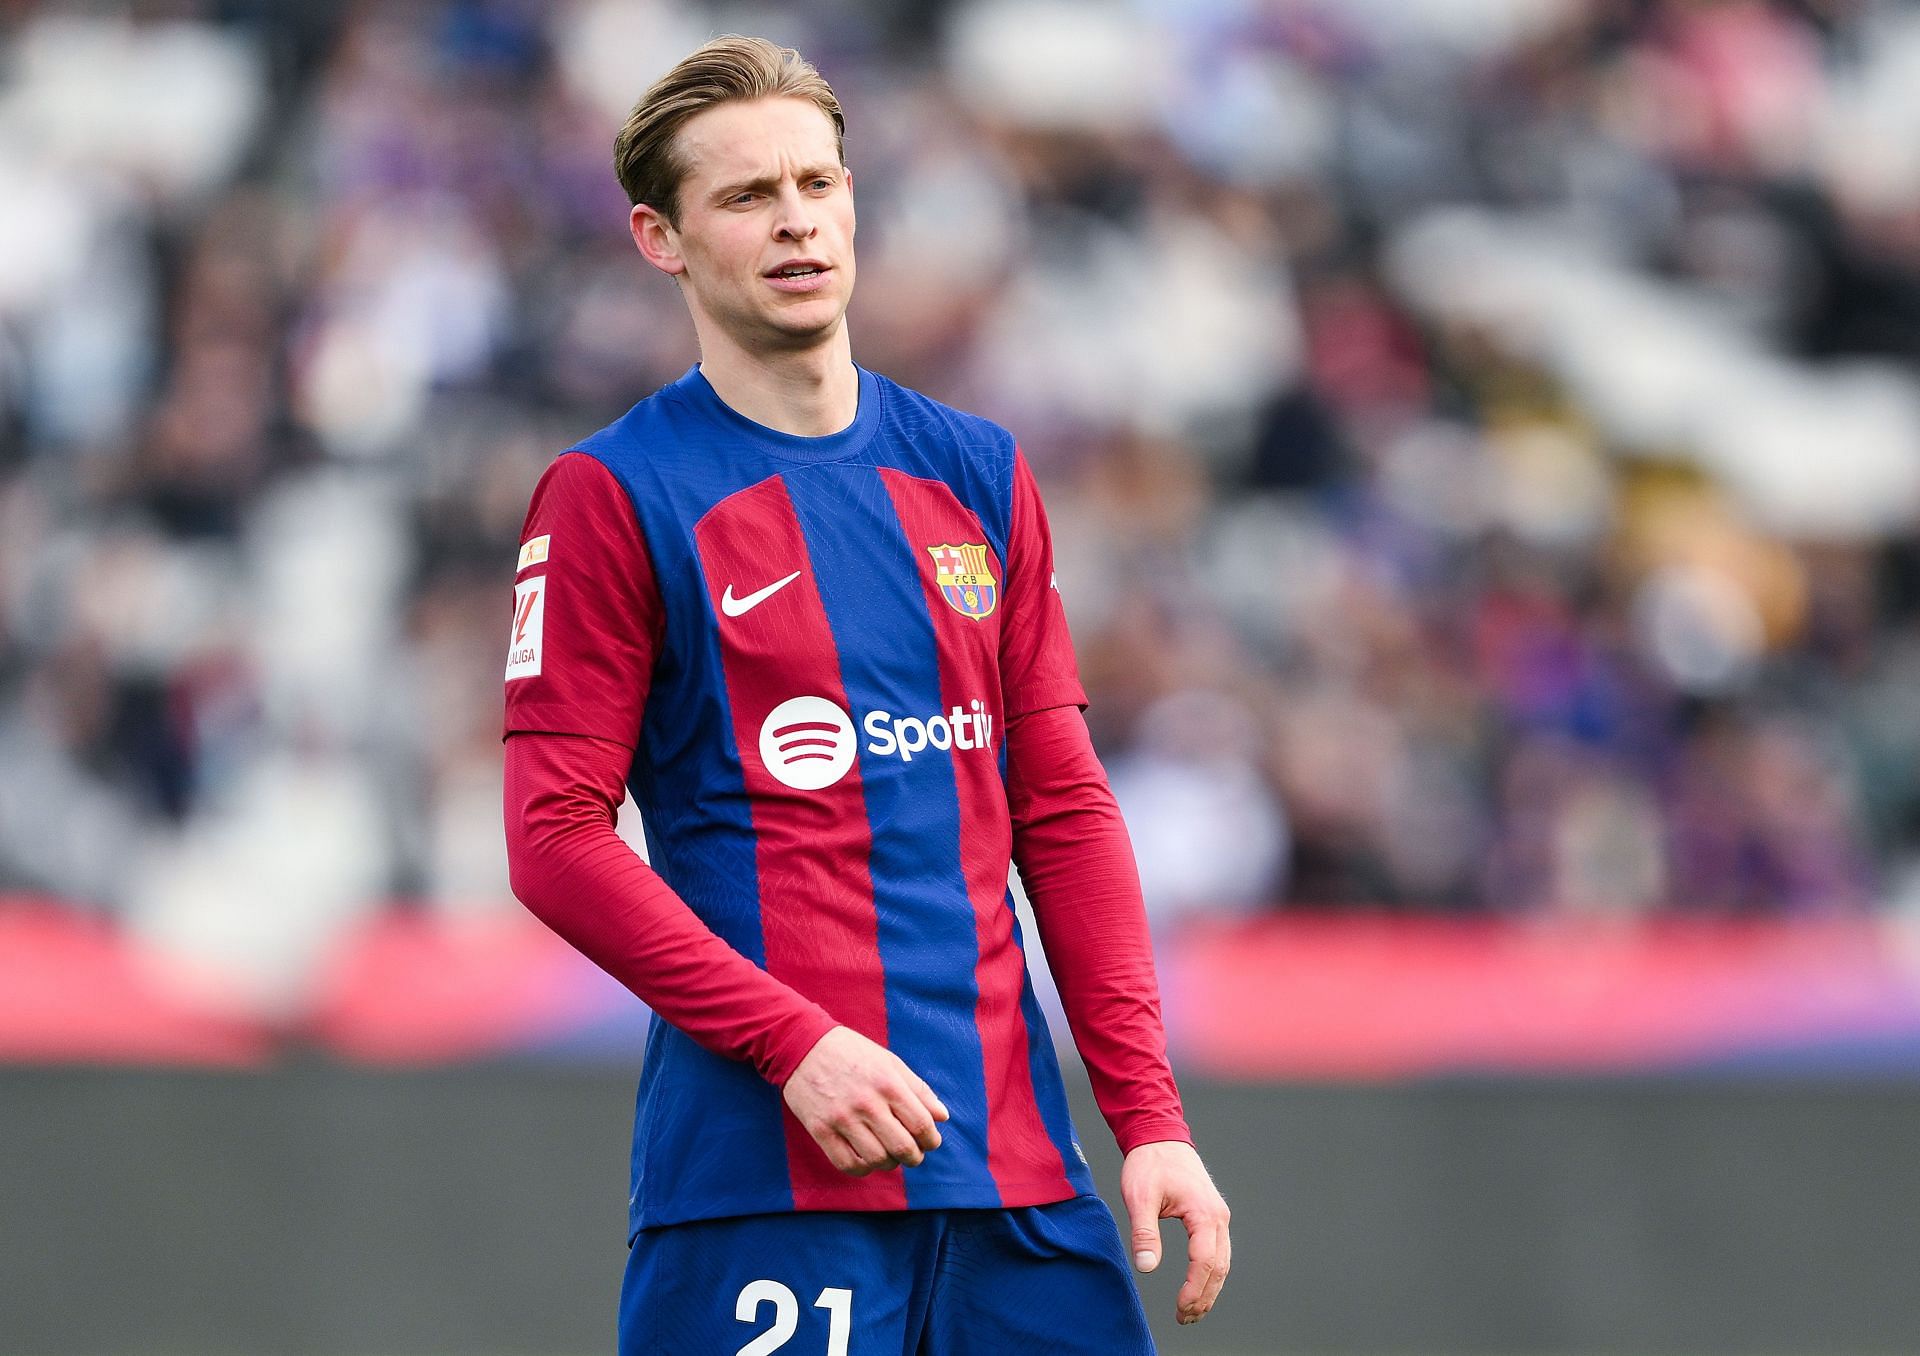 Frenkie de Jong&rsquo;s future at Camp Nou remains up in the air.